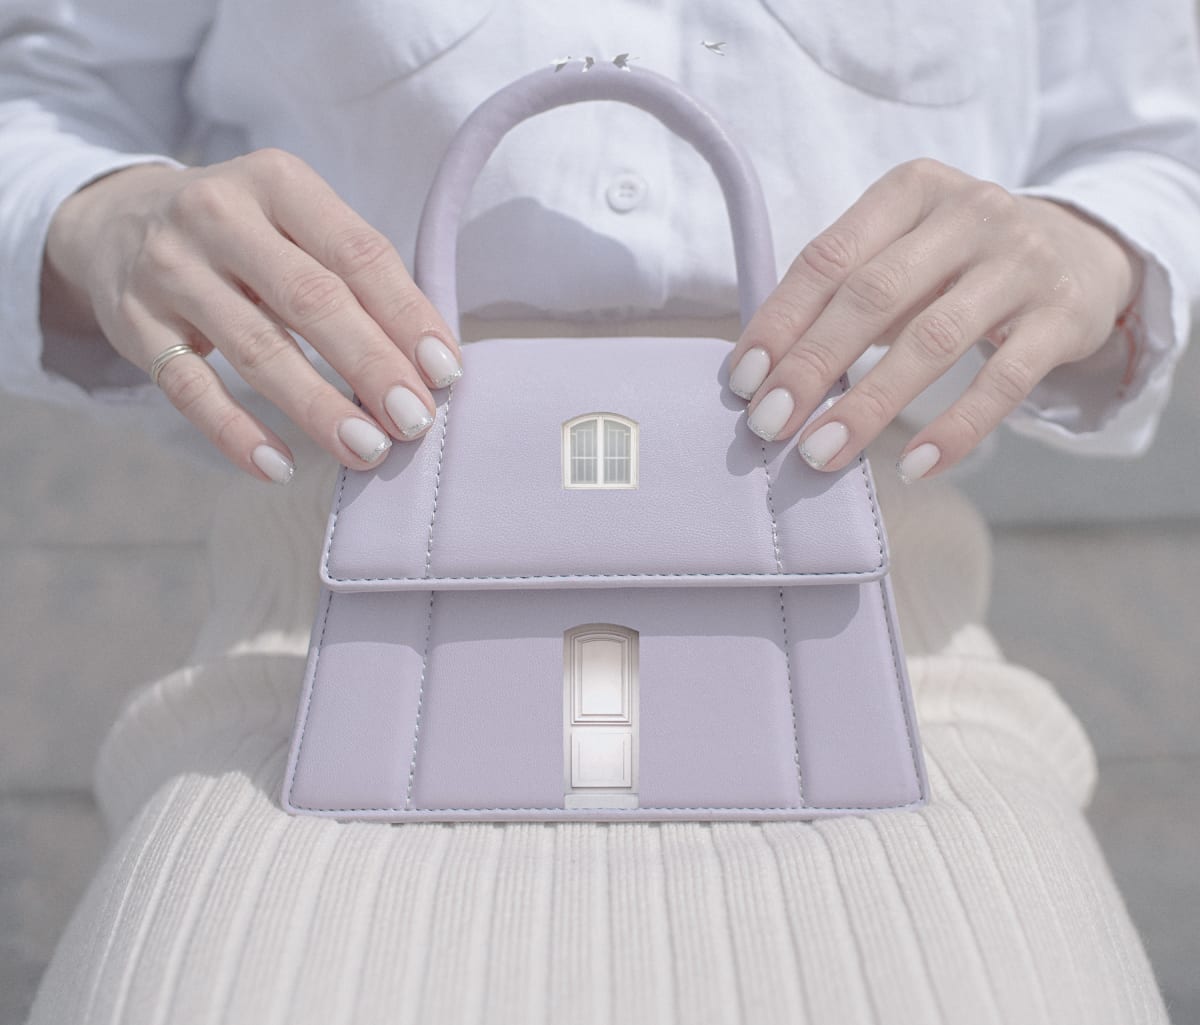 Violet by Dasha Pears  Image: Tiny little things hold keys to big secrets.